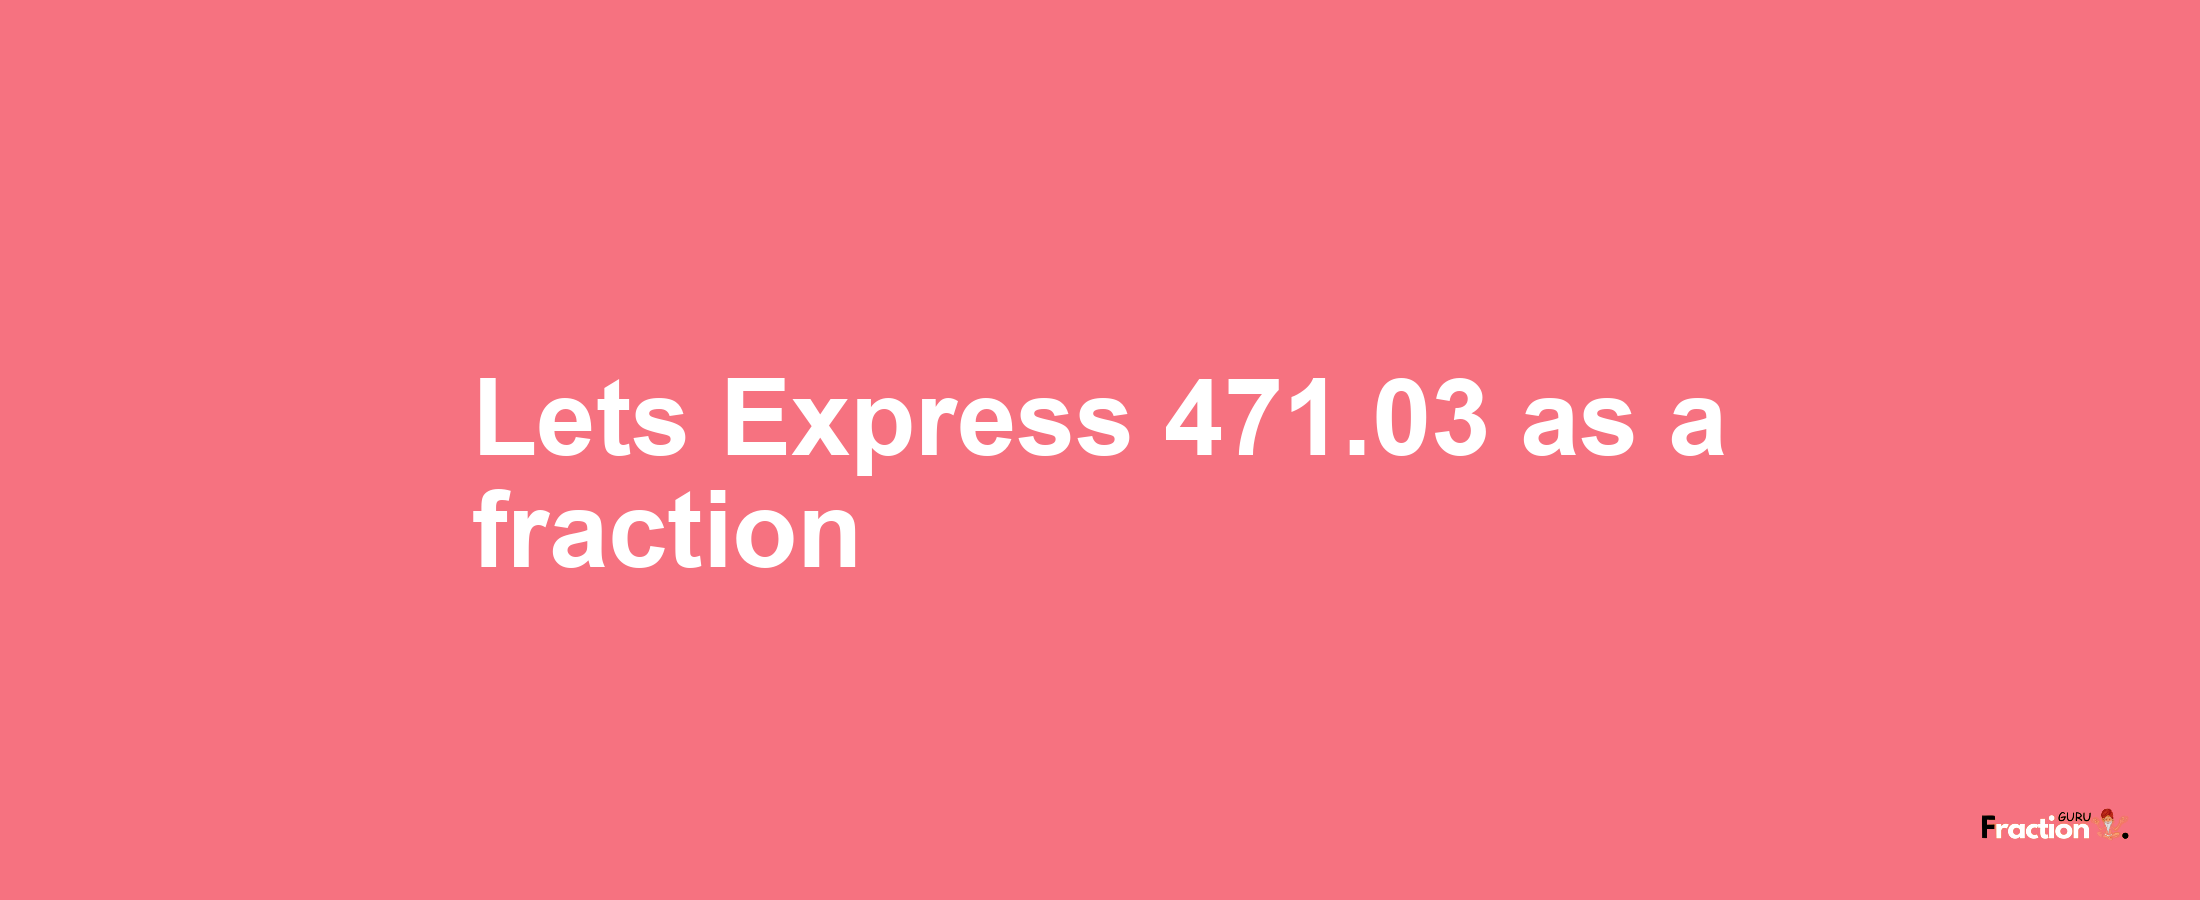 Lets Express 471.03 as afraction